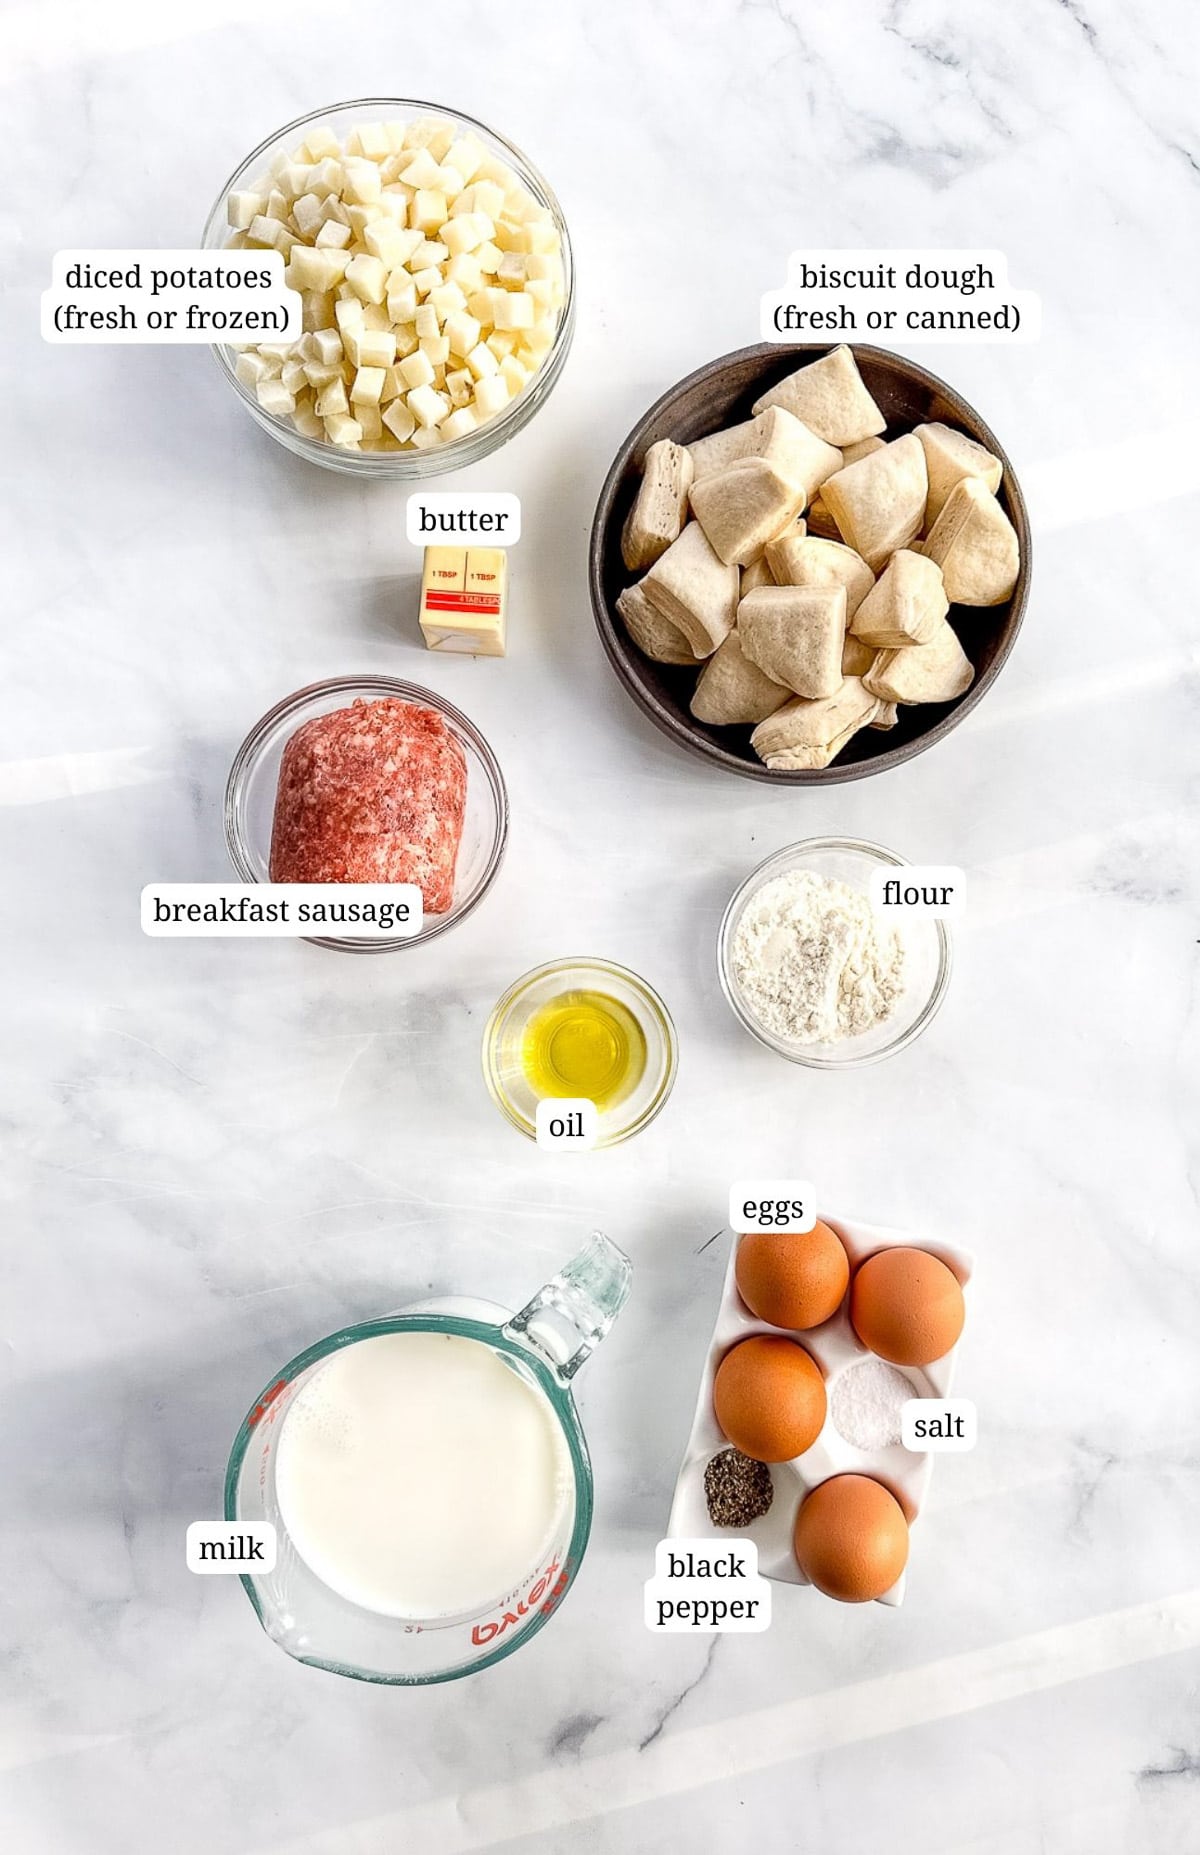 Labeled image of ingredients to make biscuits and gravy breakfast casserole.